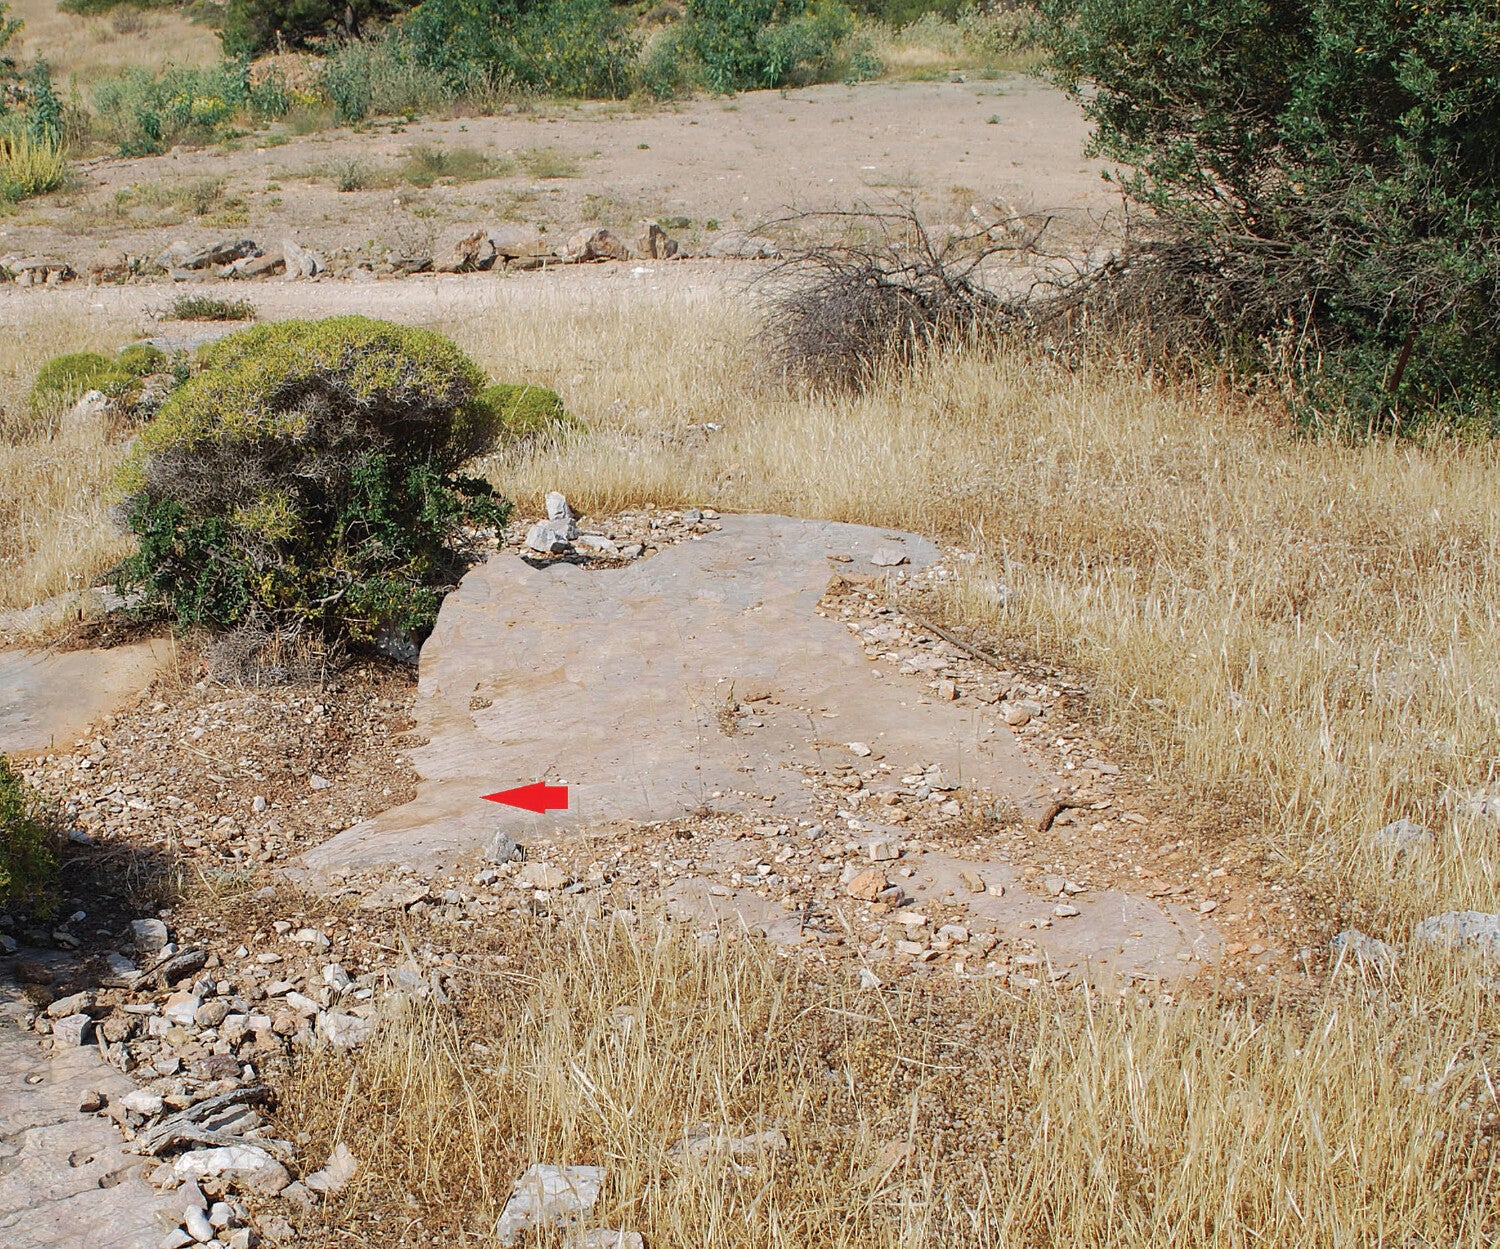 Patch of bedrock where the graffito is located (arrow); the earthen road is visible in the background